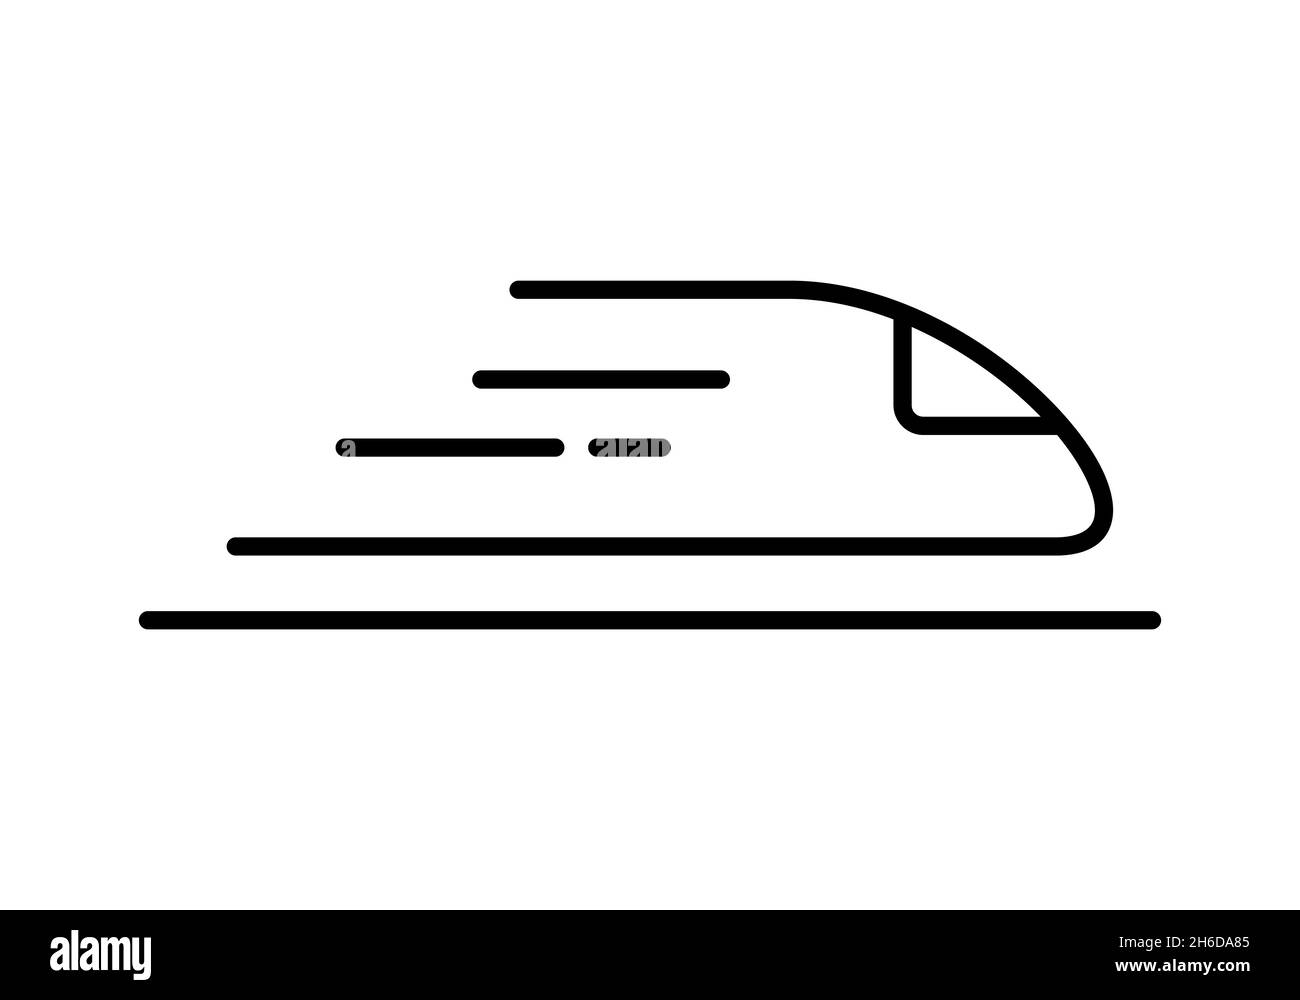 Modern train line icon. Traveling and transportation concept. City subway metro with lines symbolizing speed. Underground railway. Magnetic levitation Stock Vector